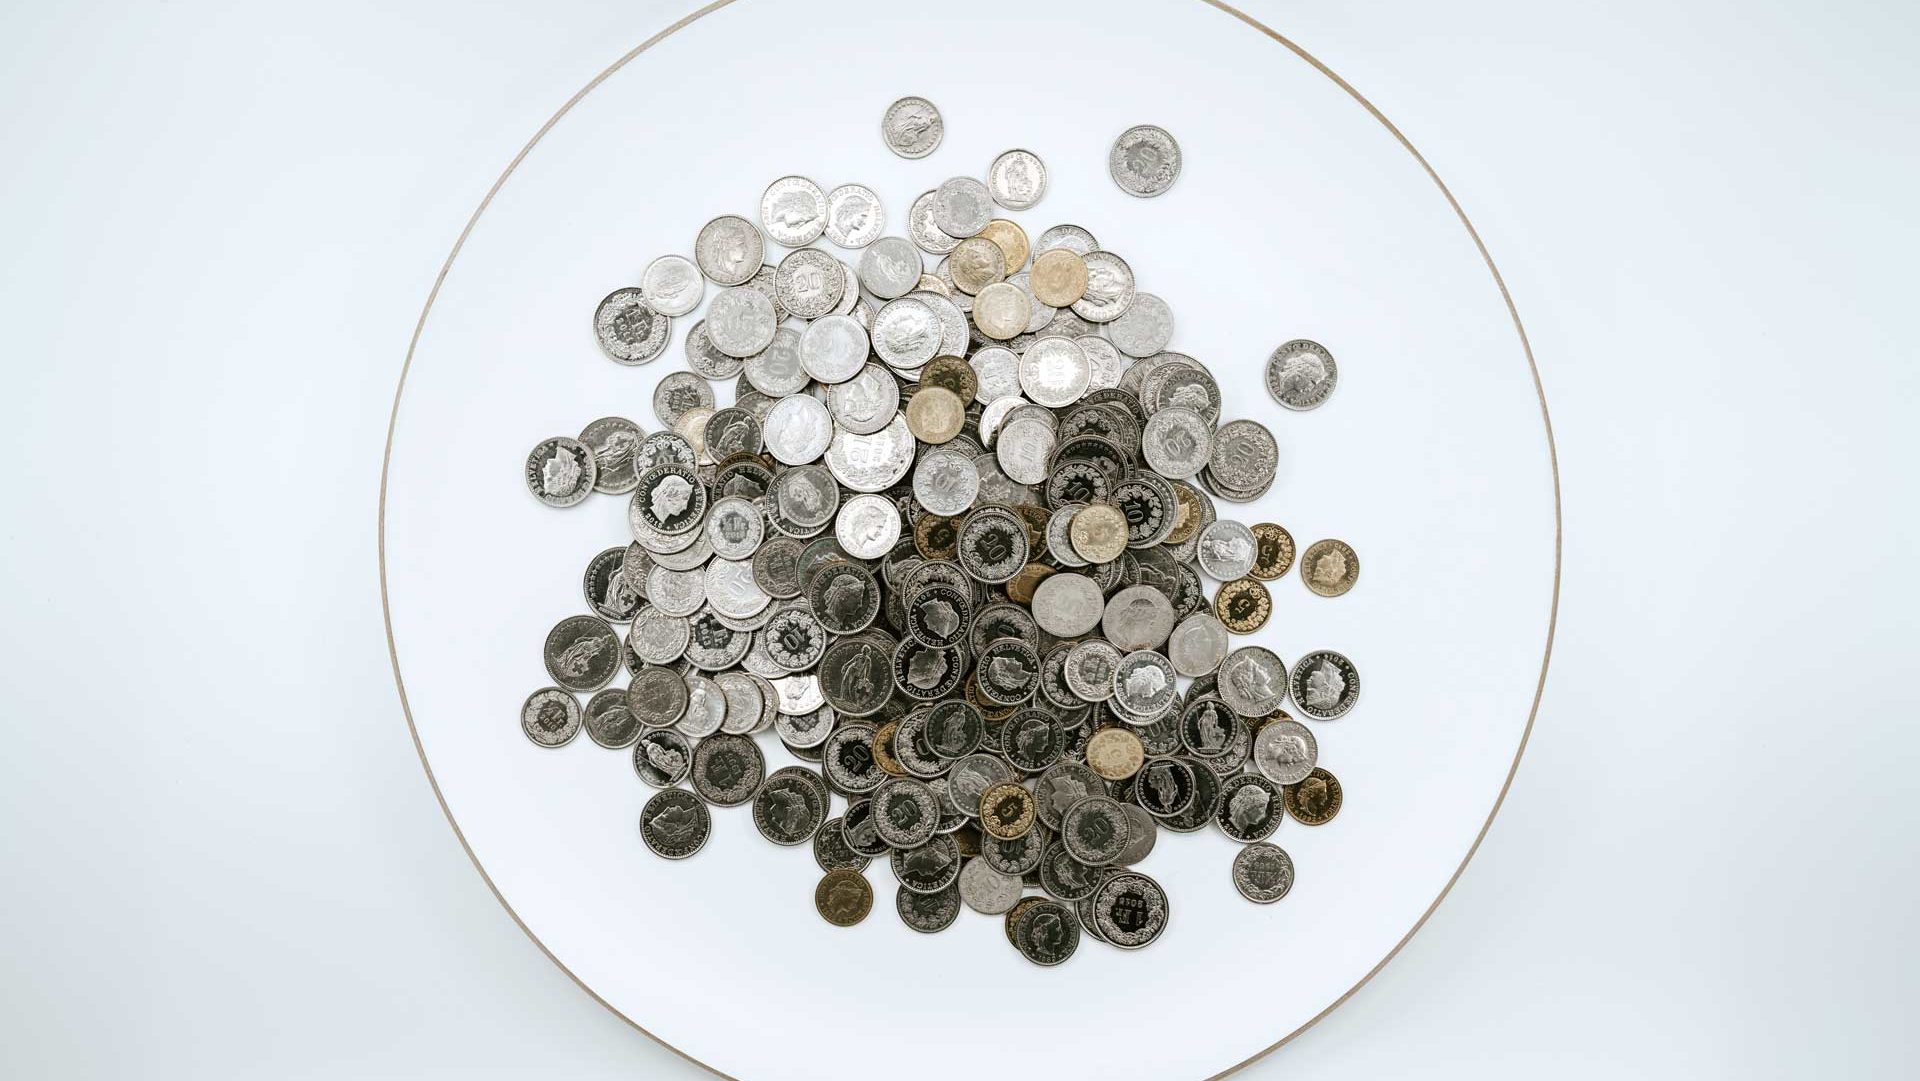 A collection of assorted coins spread out on a white surface within a circular boundary, selected from the offerings of a metaphysical shop.